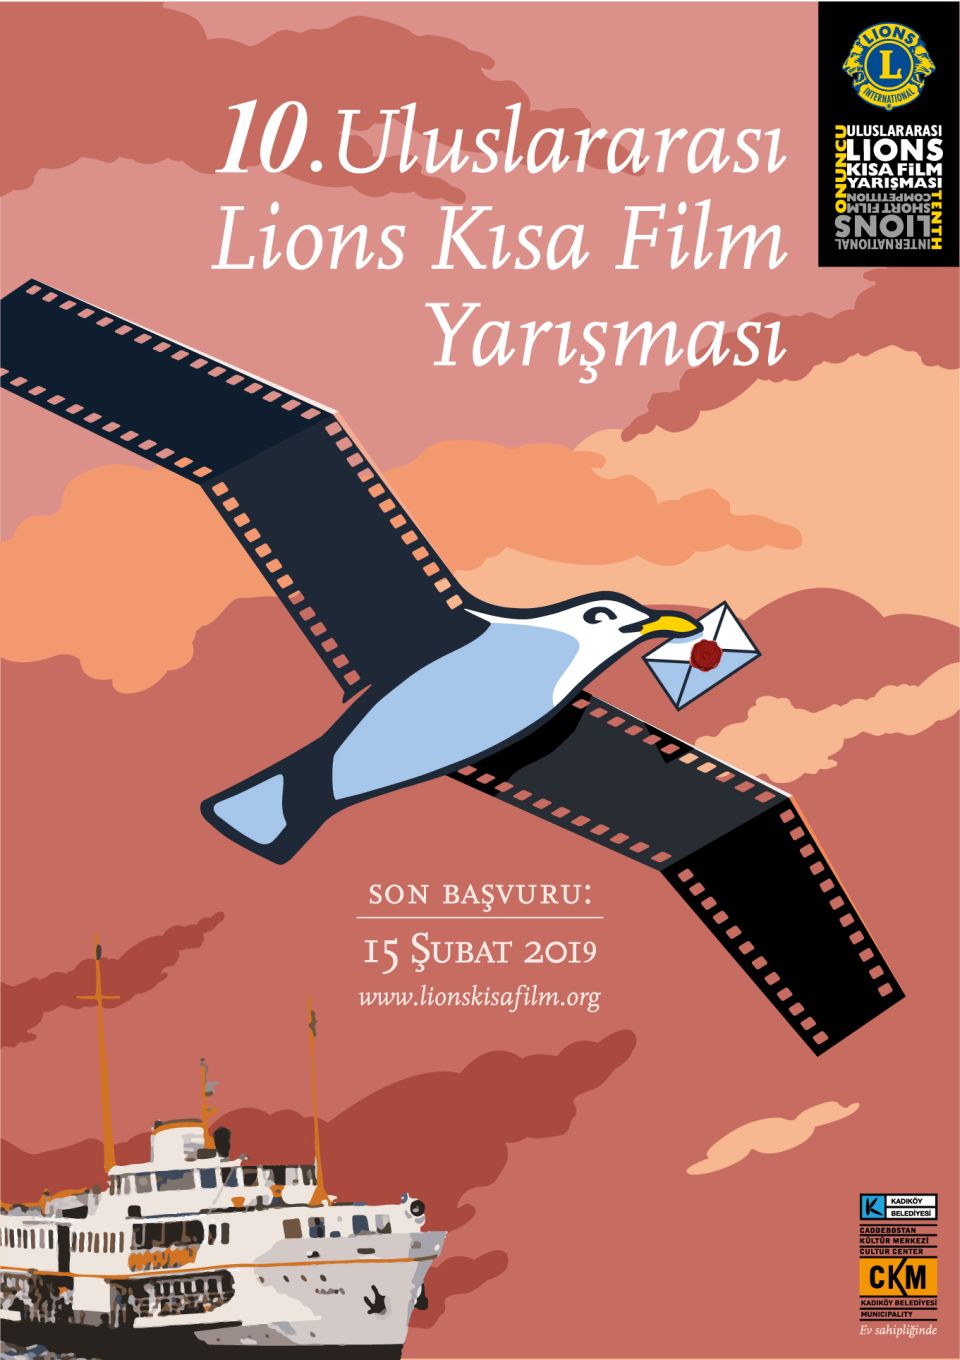 Near East University will represent North Cyprus at the Lions International Short Film Competition